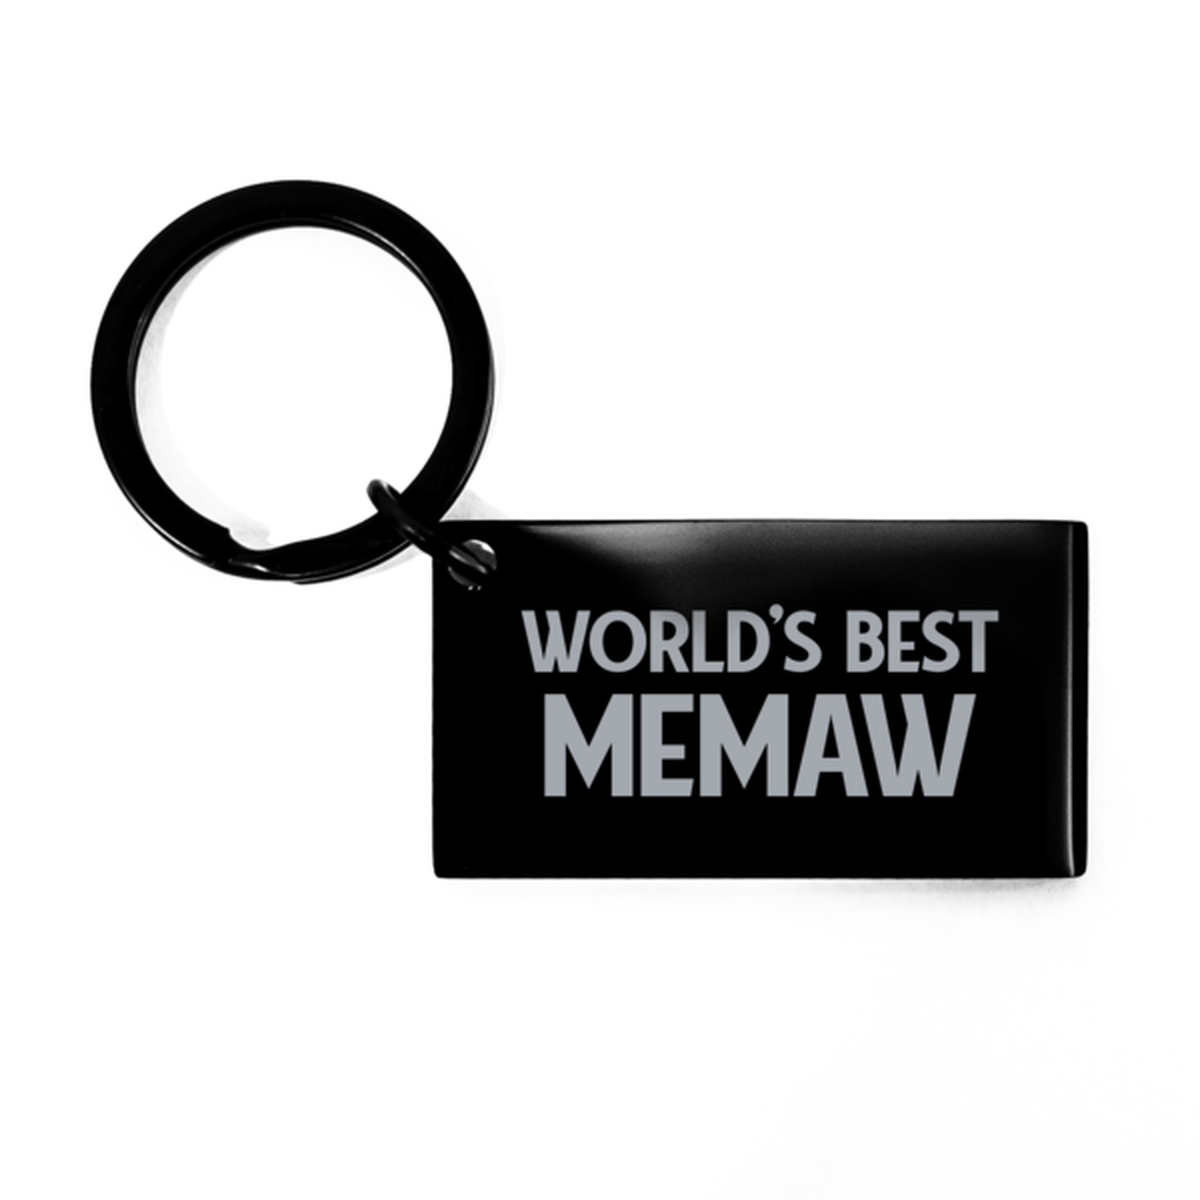 Worlds Best Memaw Gifts, Funny Black Engraved Keychain For Memaw, Birthday Presents For Women